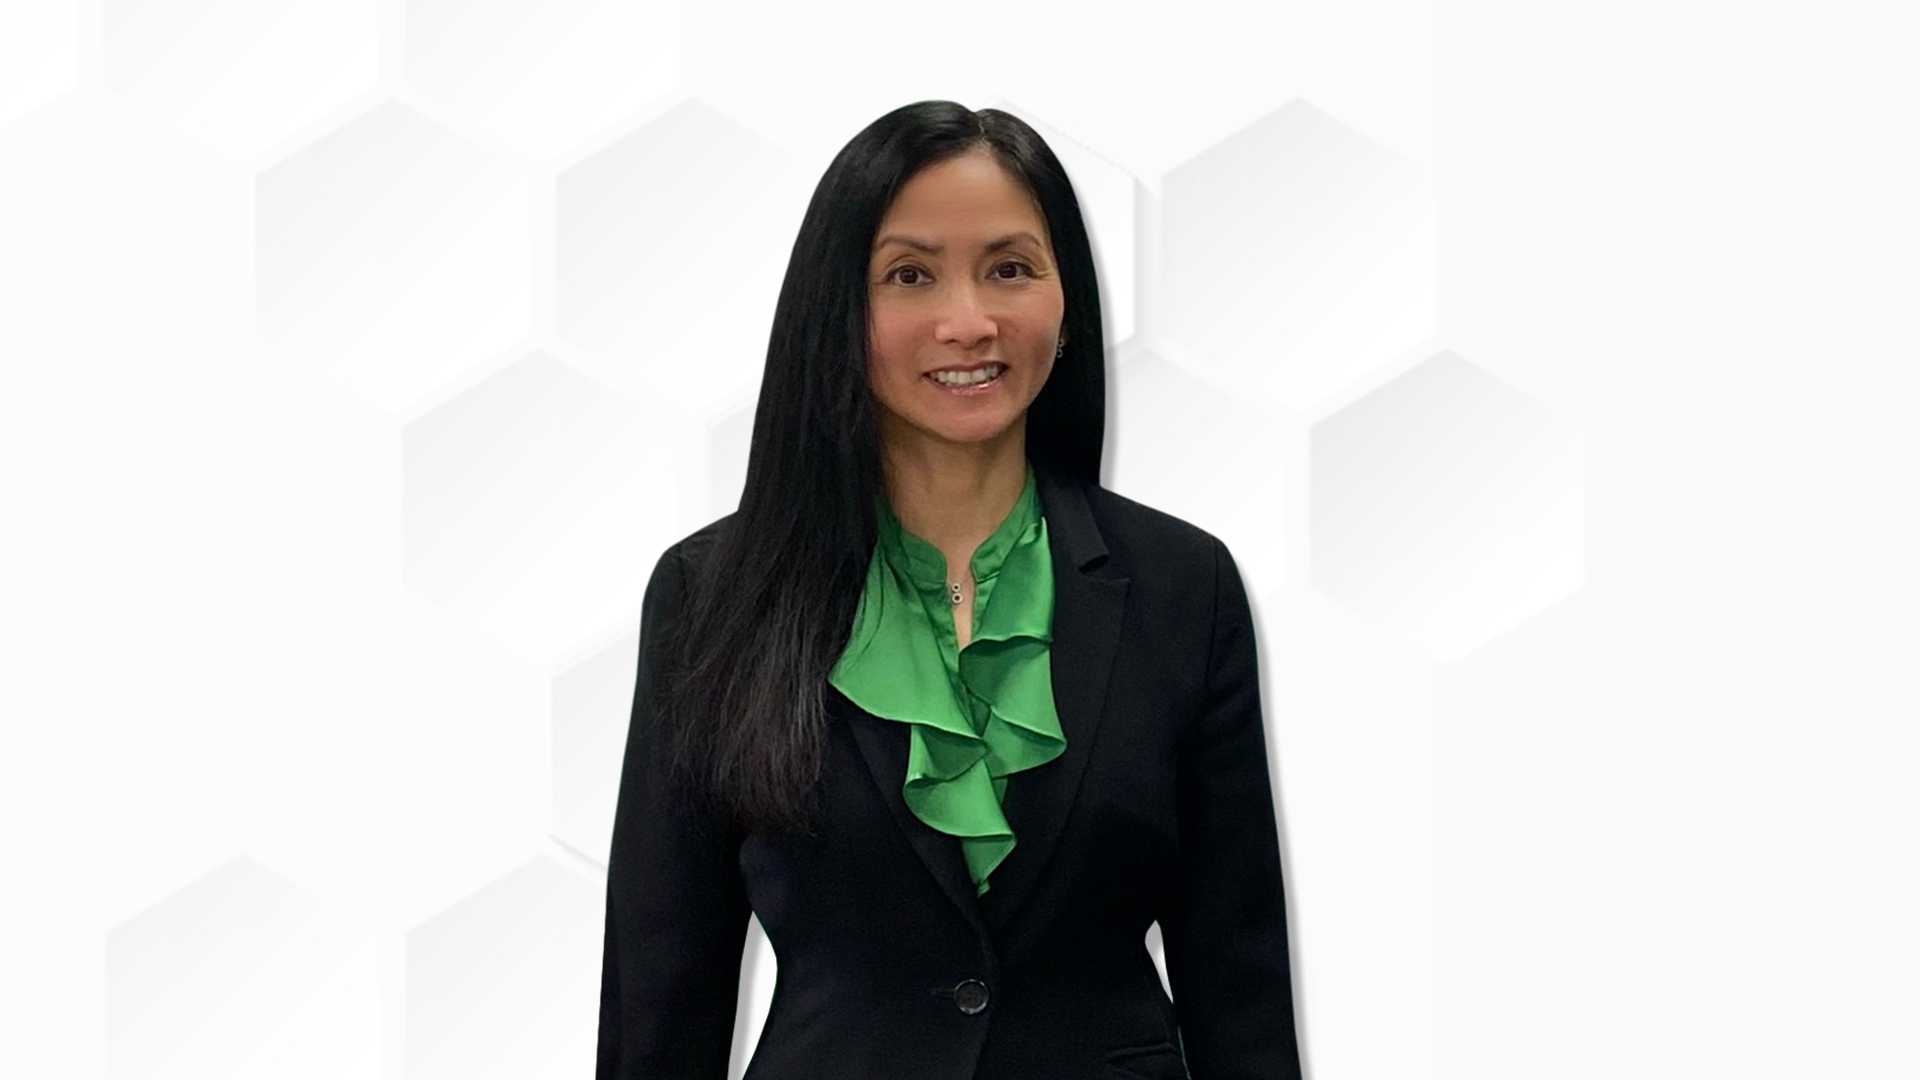 Meet Mel Cheung-Turner - Our New Marketing Director